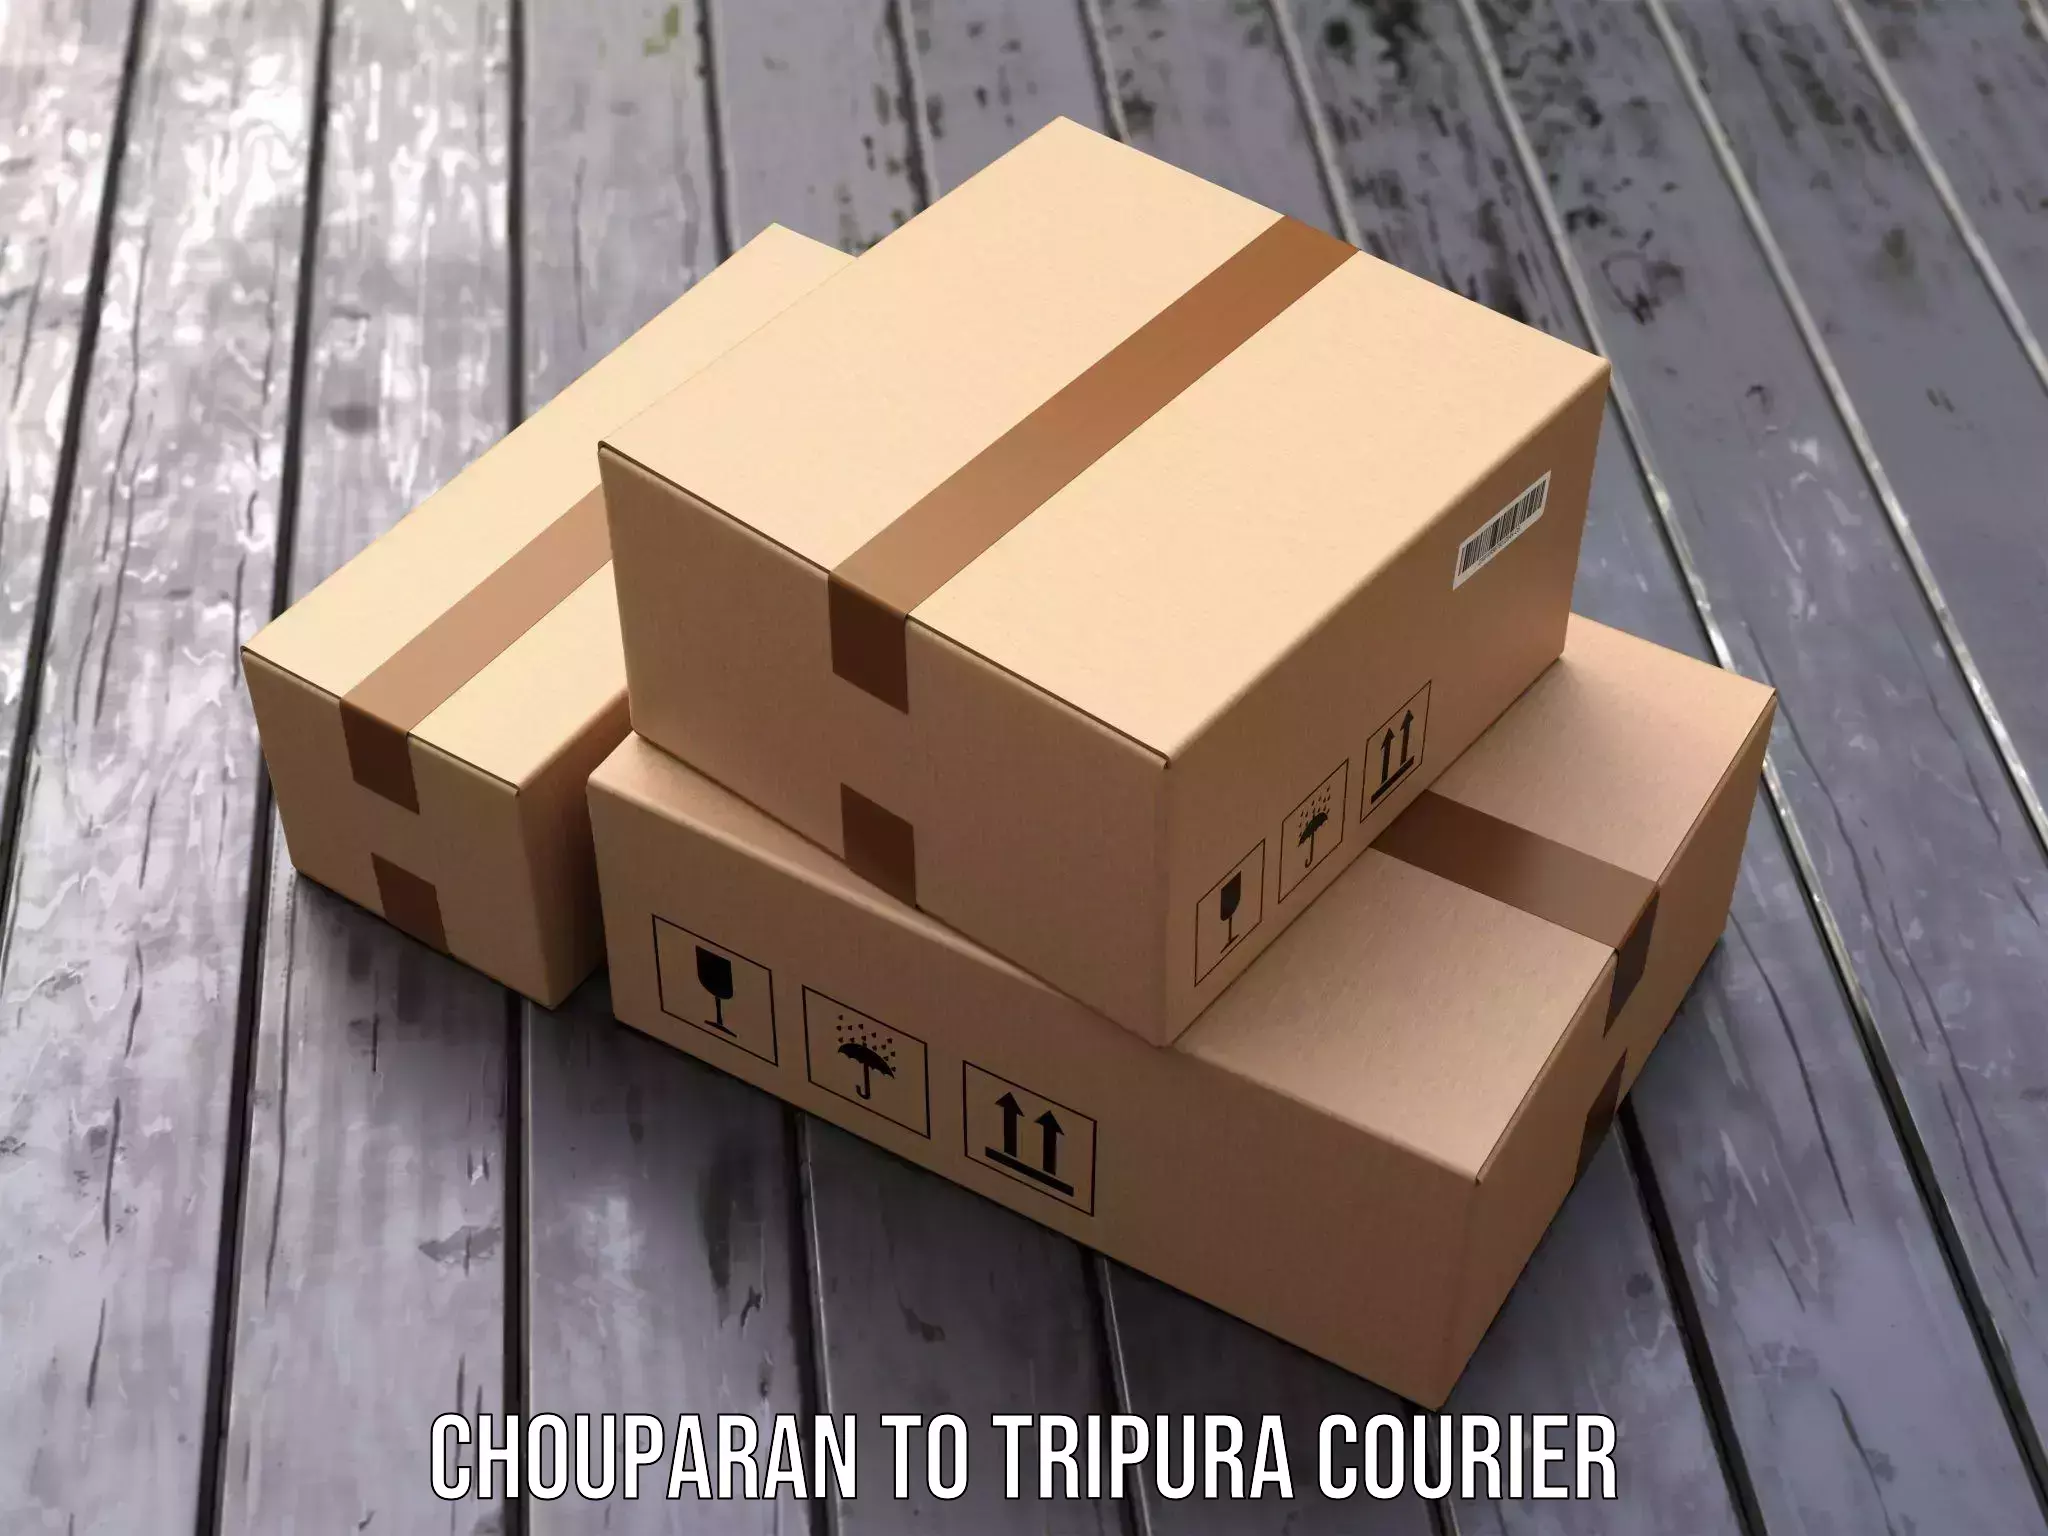 Tailored delivery services Chouparan to Udaipur Tripura